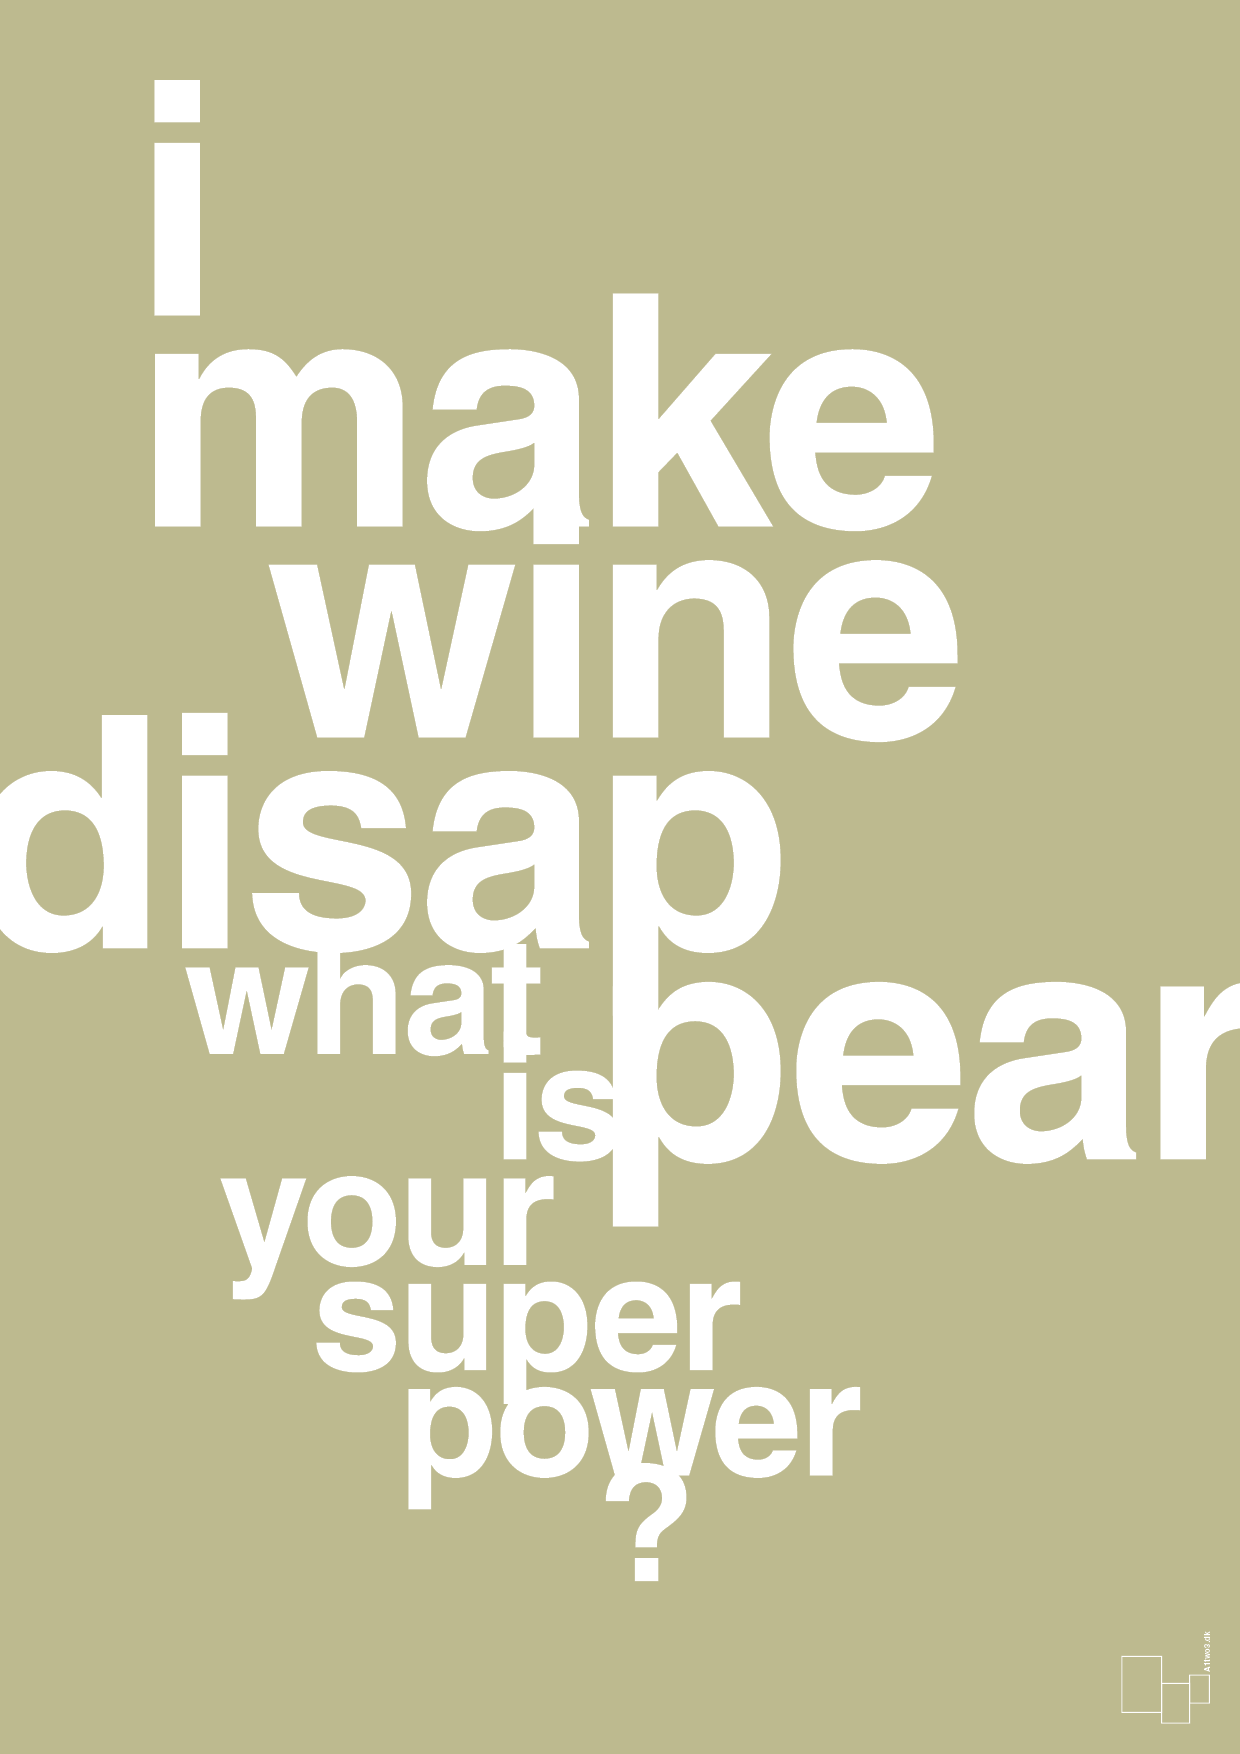 i make wine disappear what is your super power - Plakat med Mad & Drikke i Back to Nature